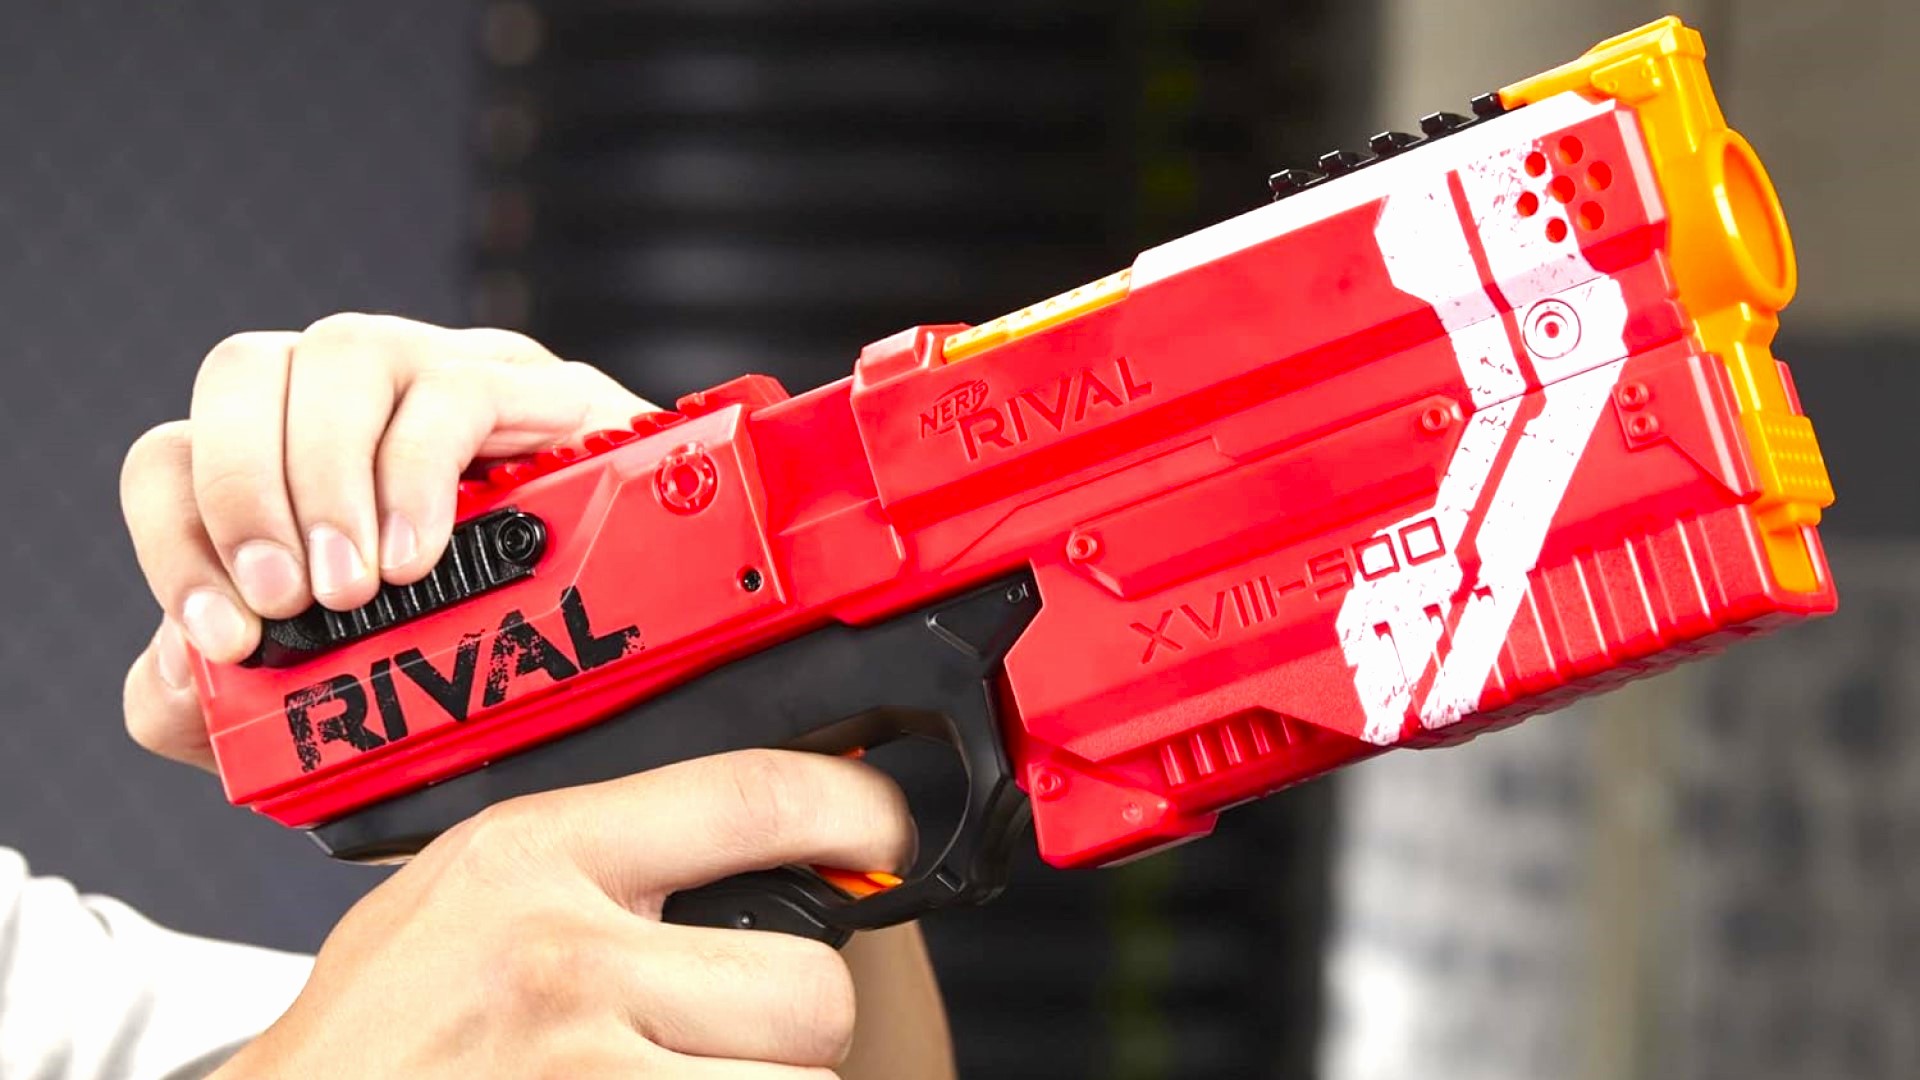 Purchase Fascinating cheap new nerf guns at Cheap Prices 